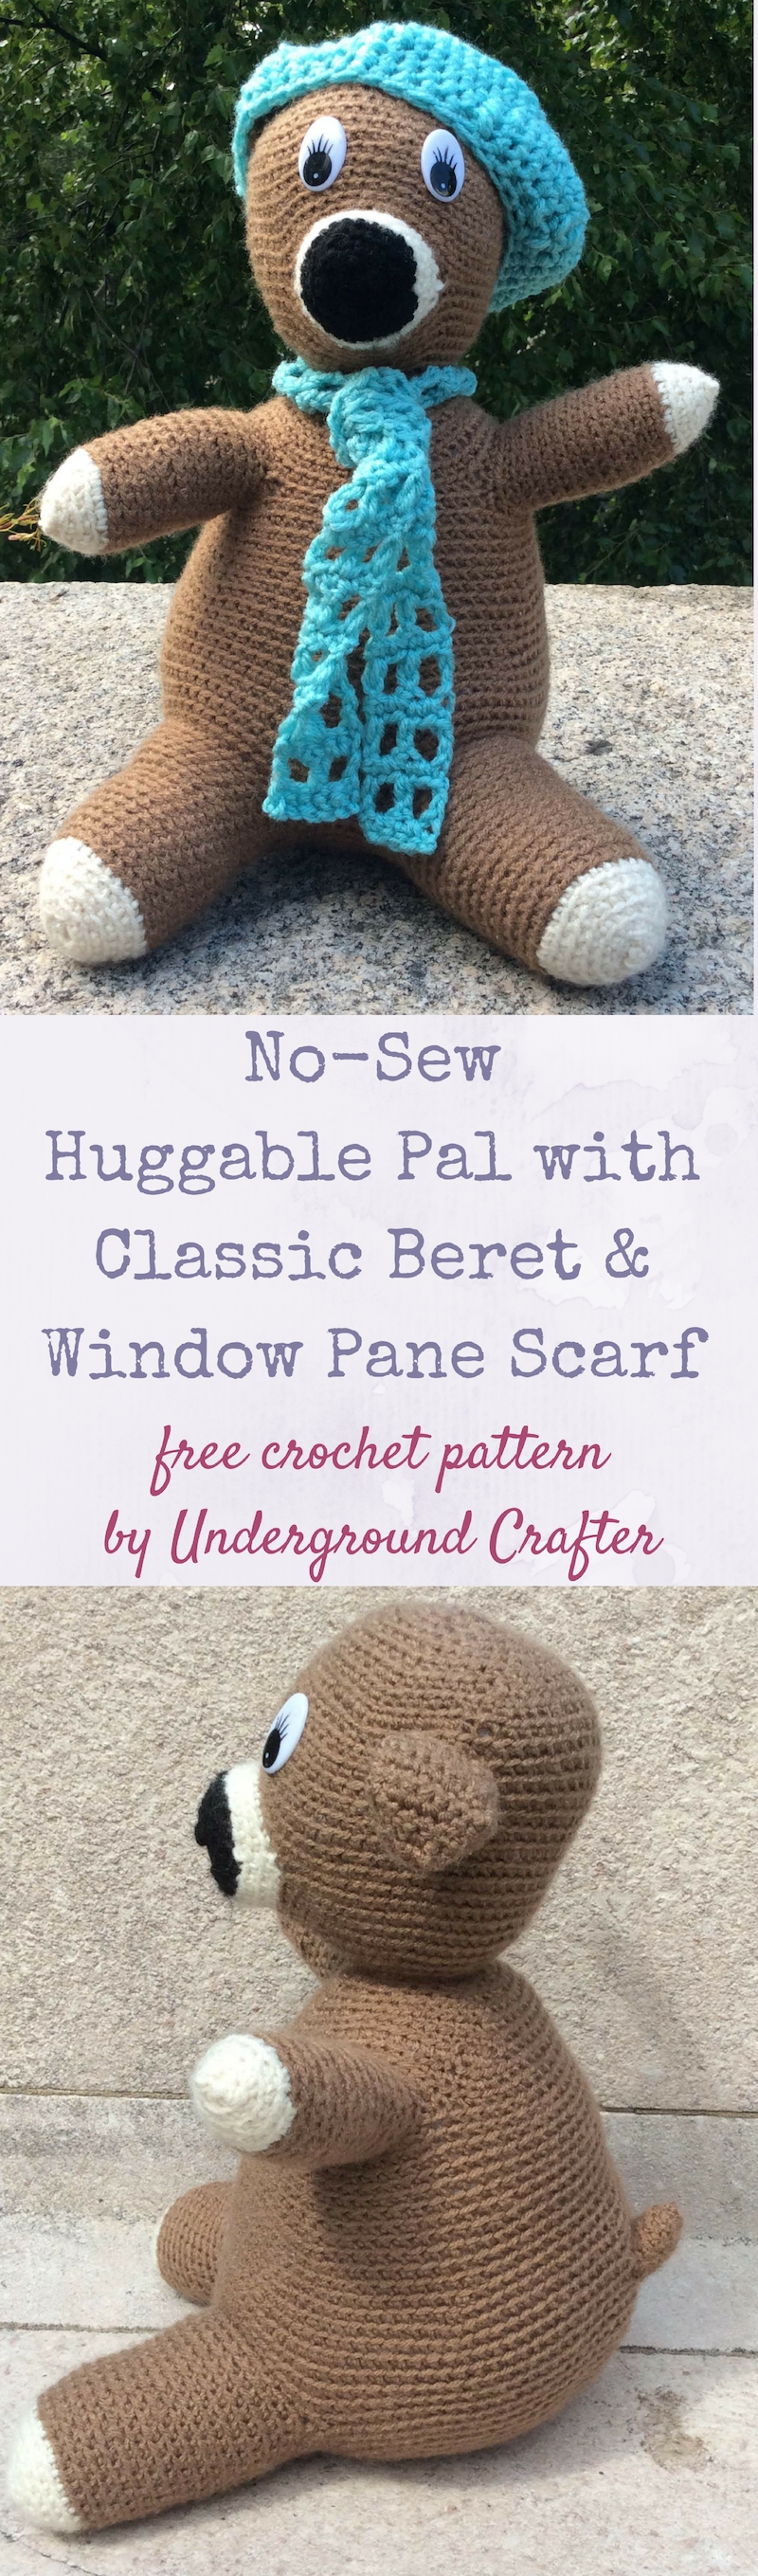 No-Sew Huggable Pal with Classic Beret and Window Pane Scarf, free crochet pattern in Red Heart Super Saver yarn by Underground Crafter | This amigurumi pal is crocheted in one piece with no sewing! Accessorize your pal with a classic beret and lacy scarf. The Poly-Fil Supreme® Ultra Plush Fiber Fill makes it extra soft and cuddly. #joycreators #fairfieldworld #attheheartofyourproject#redheartyarns